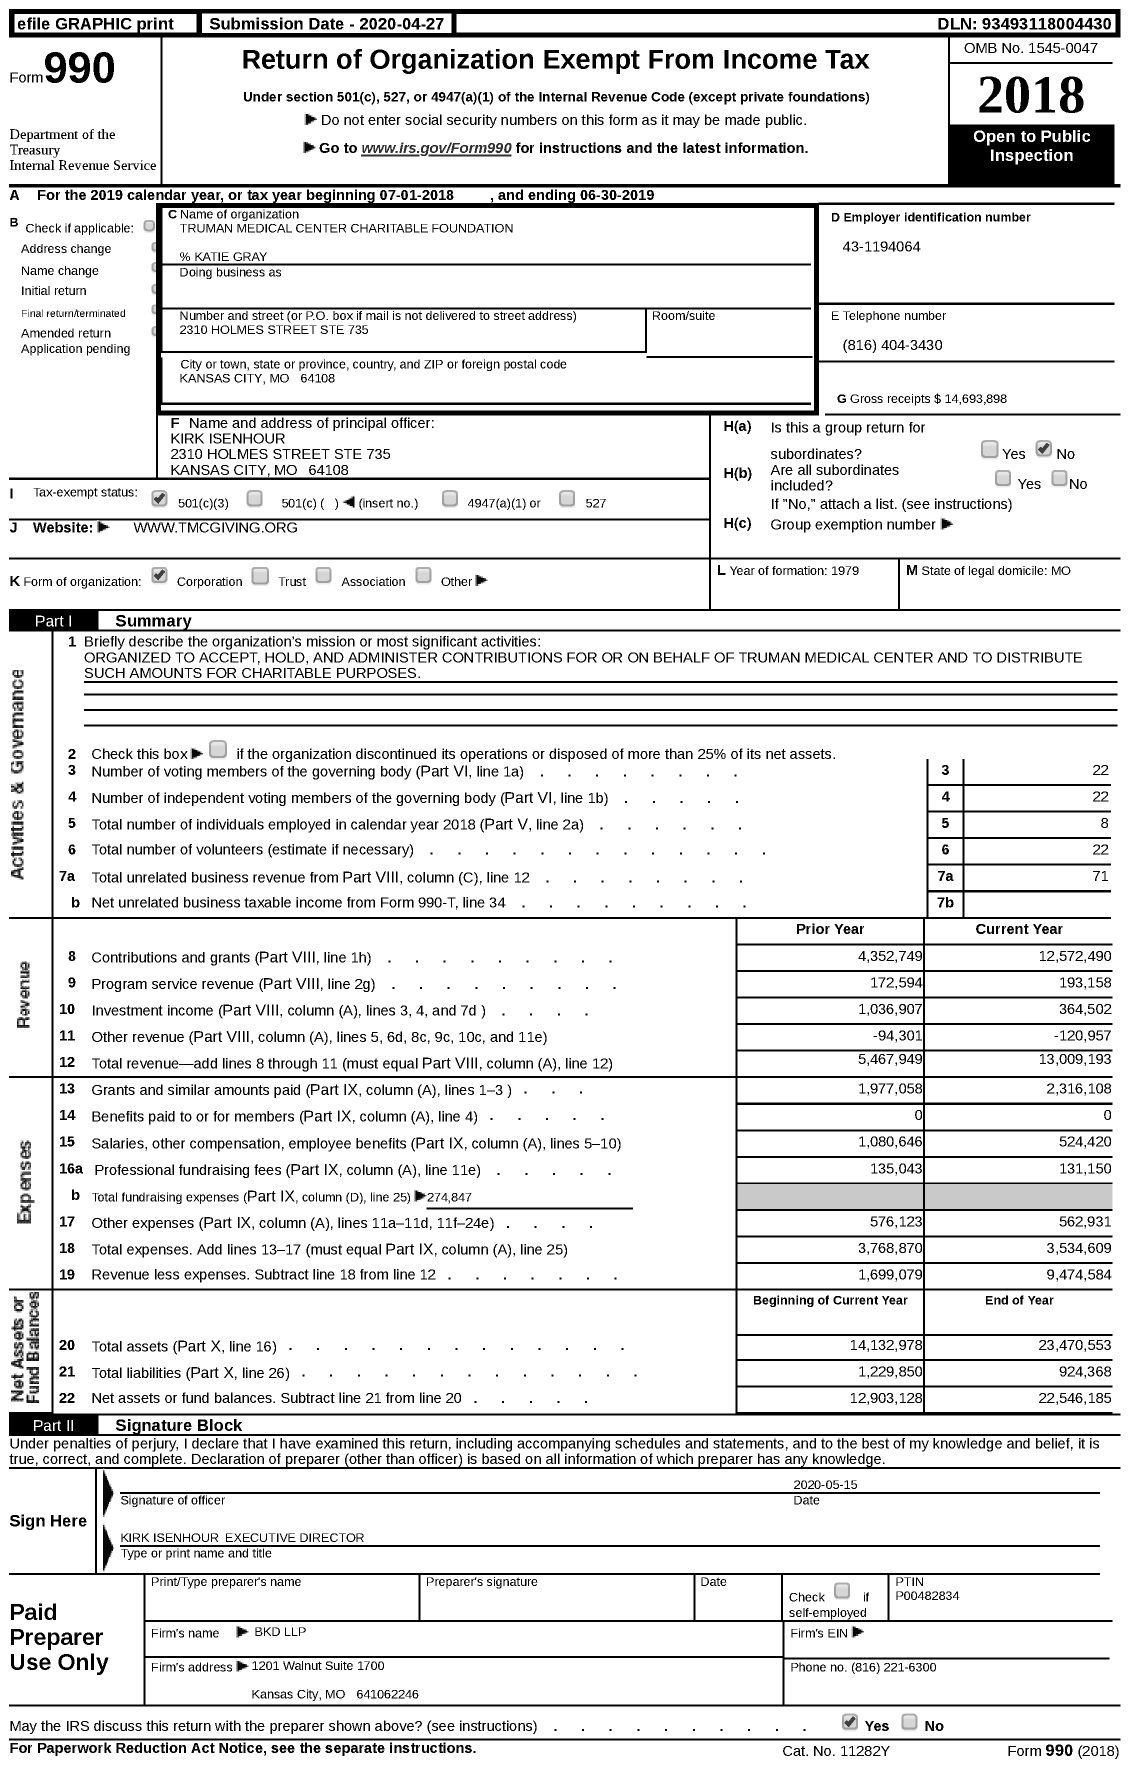 Image of first page of 2018 Form 990 for University Health Foundation / Truman Medical Center Charitable Foundation (TMC)